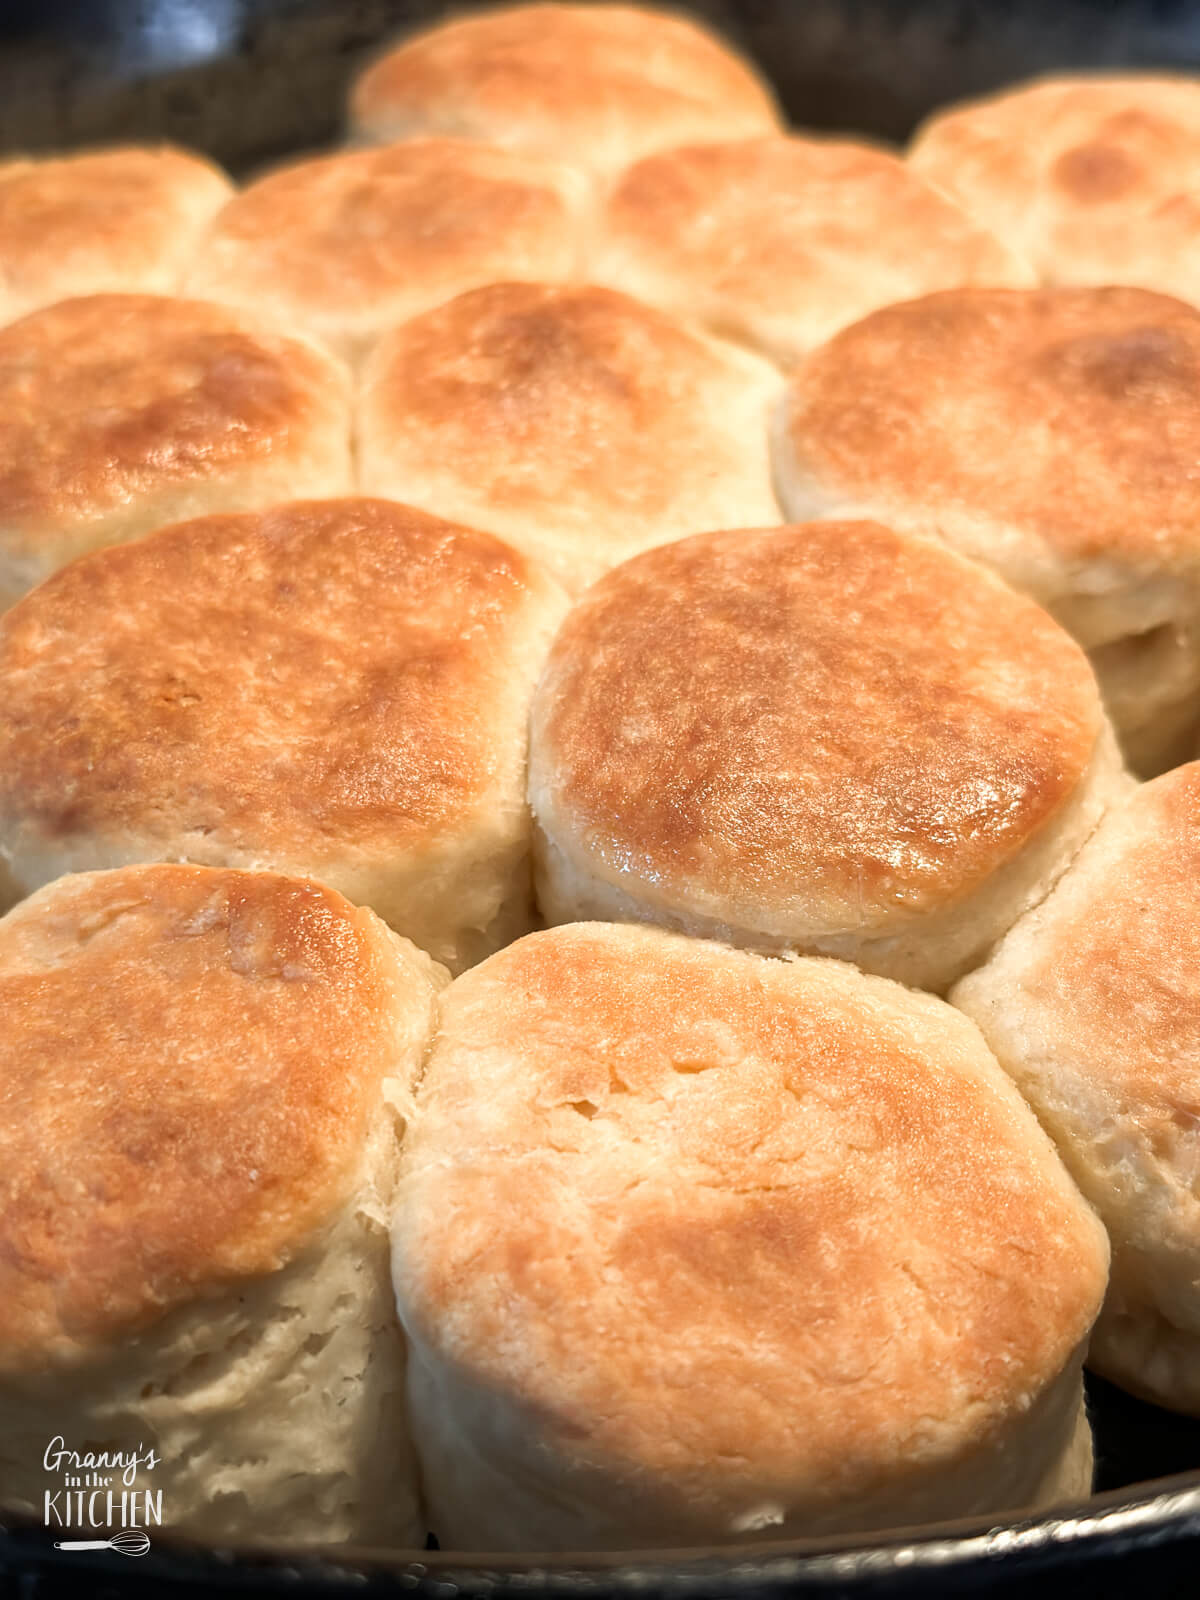 biscuits baked in a cast iron skillet.